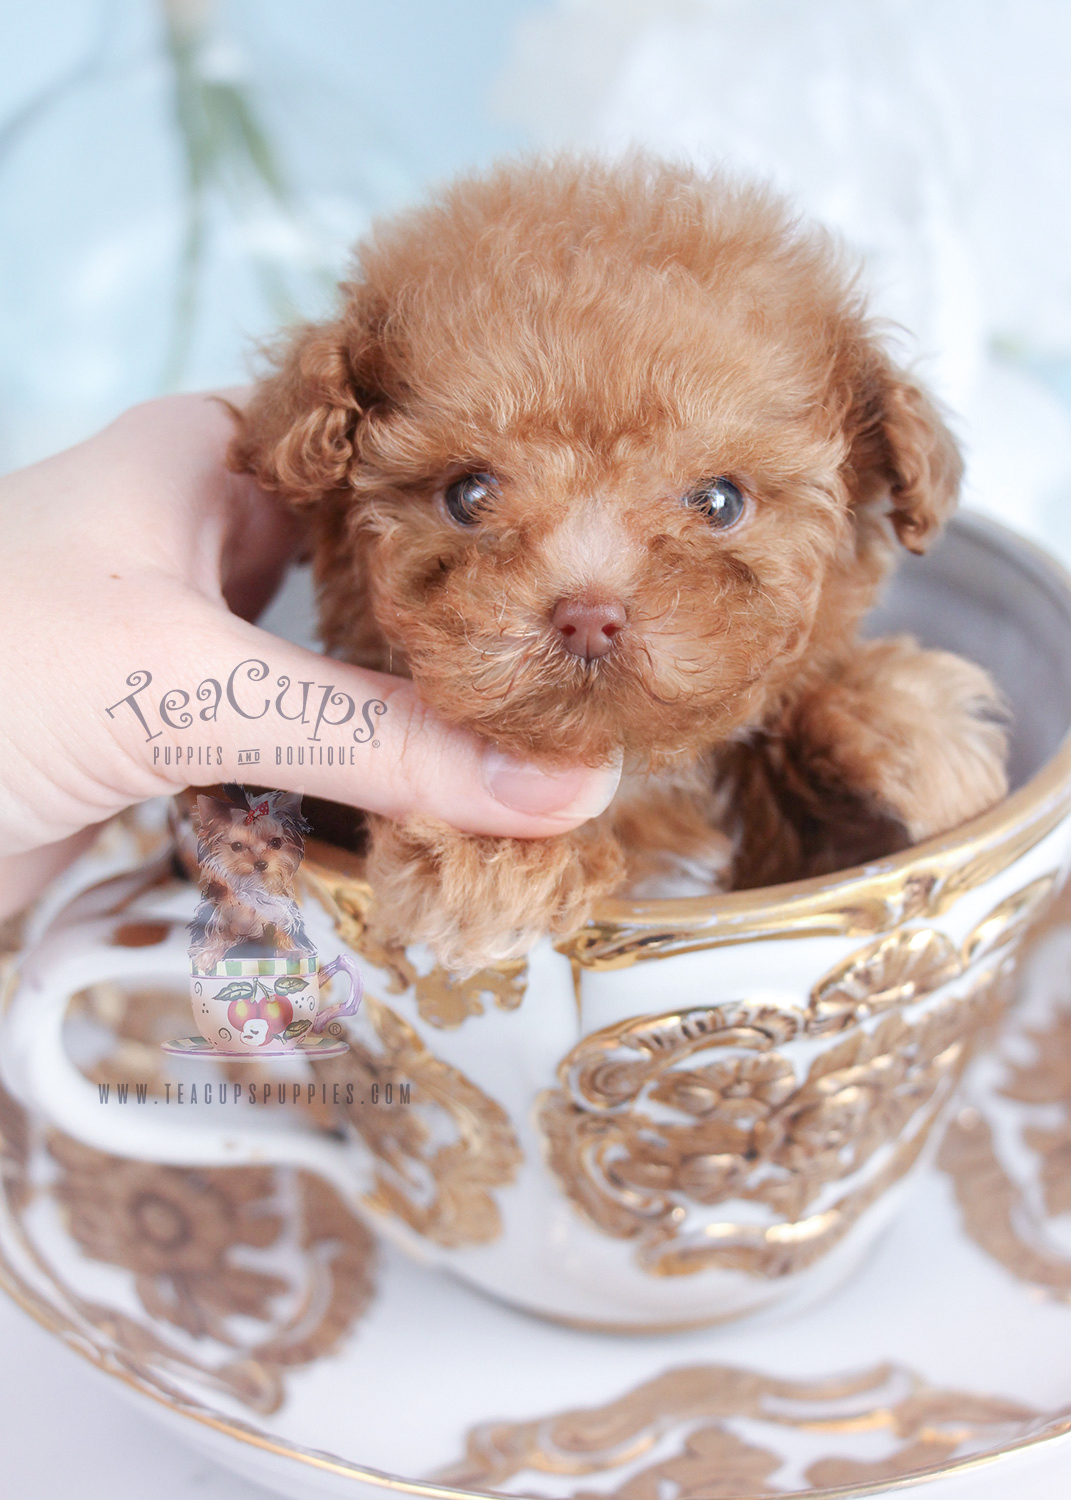 Teacup Poodle Puppies For Sale by Teacup Puppies and Boutique